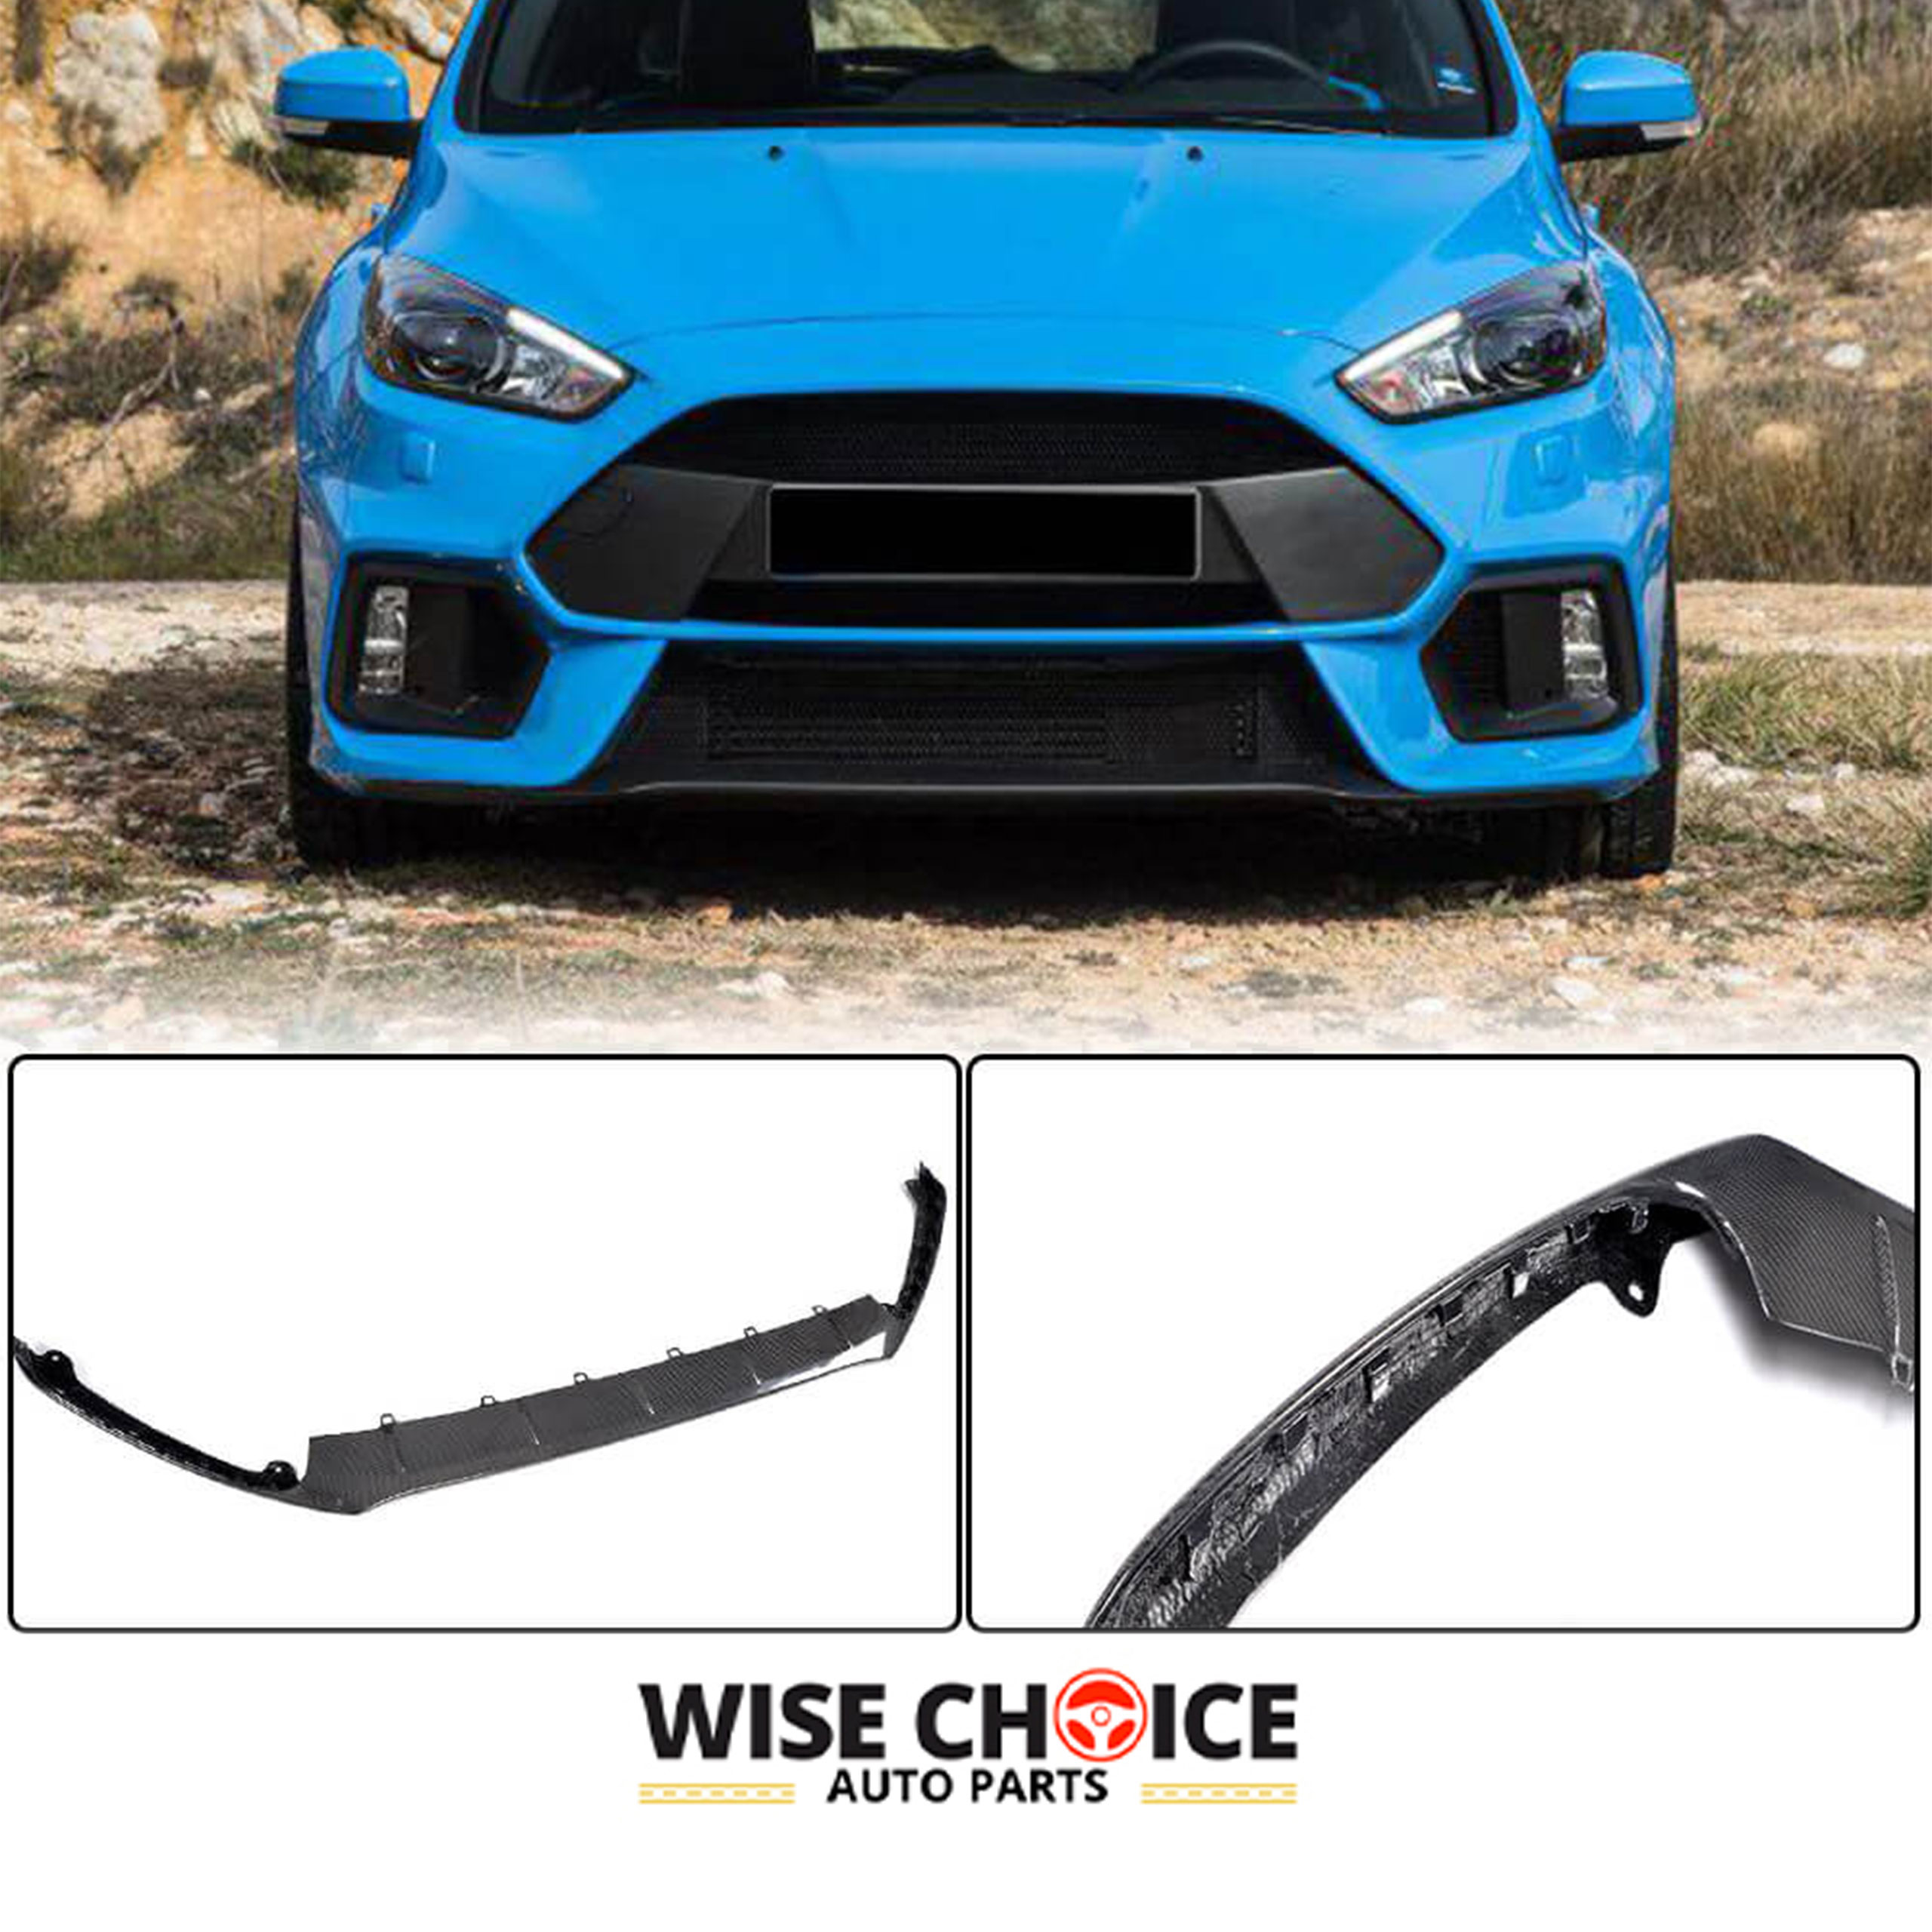 MK3 Ford Focus RS (2016-2018) sporting a stylish Carbon Fiber Front Lip